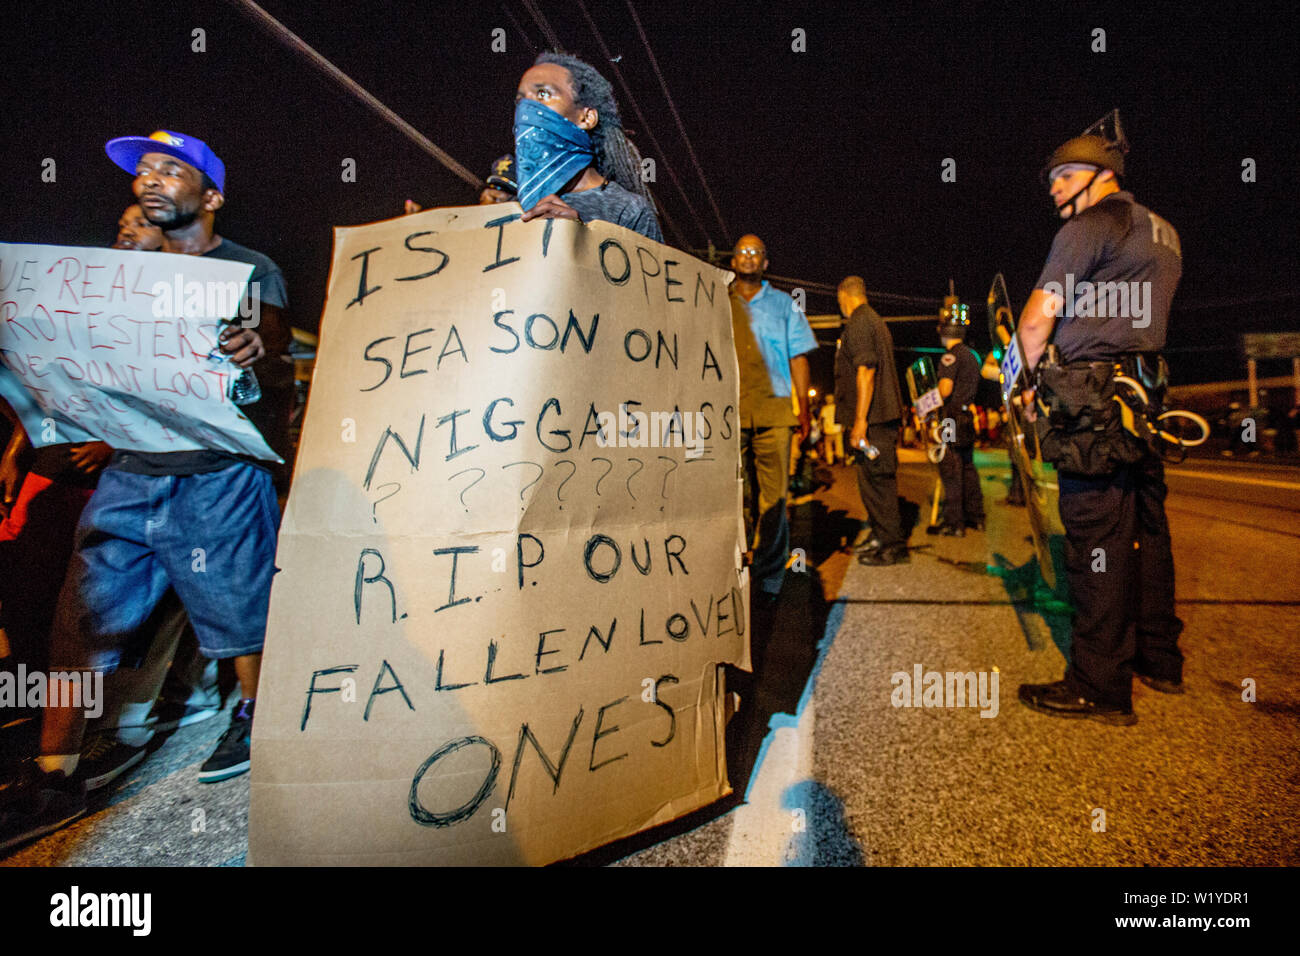 Police and protesters clash in the streets of Ferguson. Heavily armed police provoked many of the protesters as they swooped in, guns pointing, to  arrest deemed 'troublemakers' among the protesters in downtown Ferguson following the killing of unarmed Michael Brown (18). Stock Photo